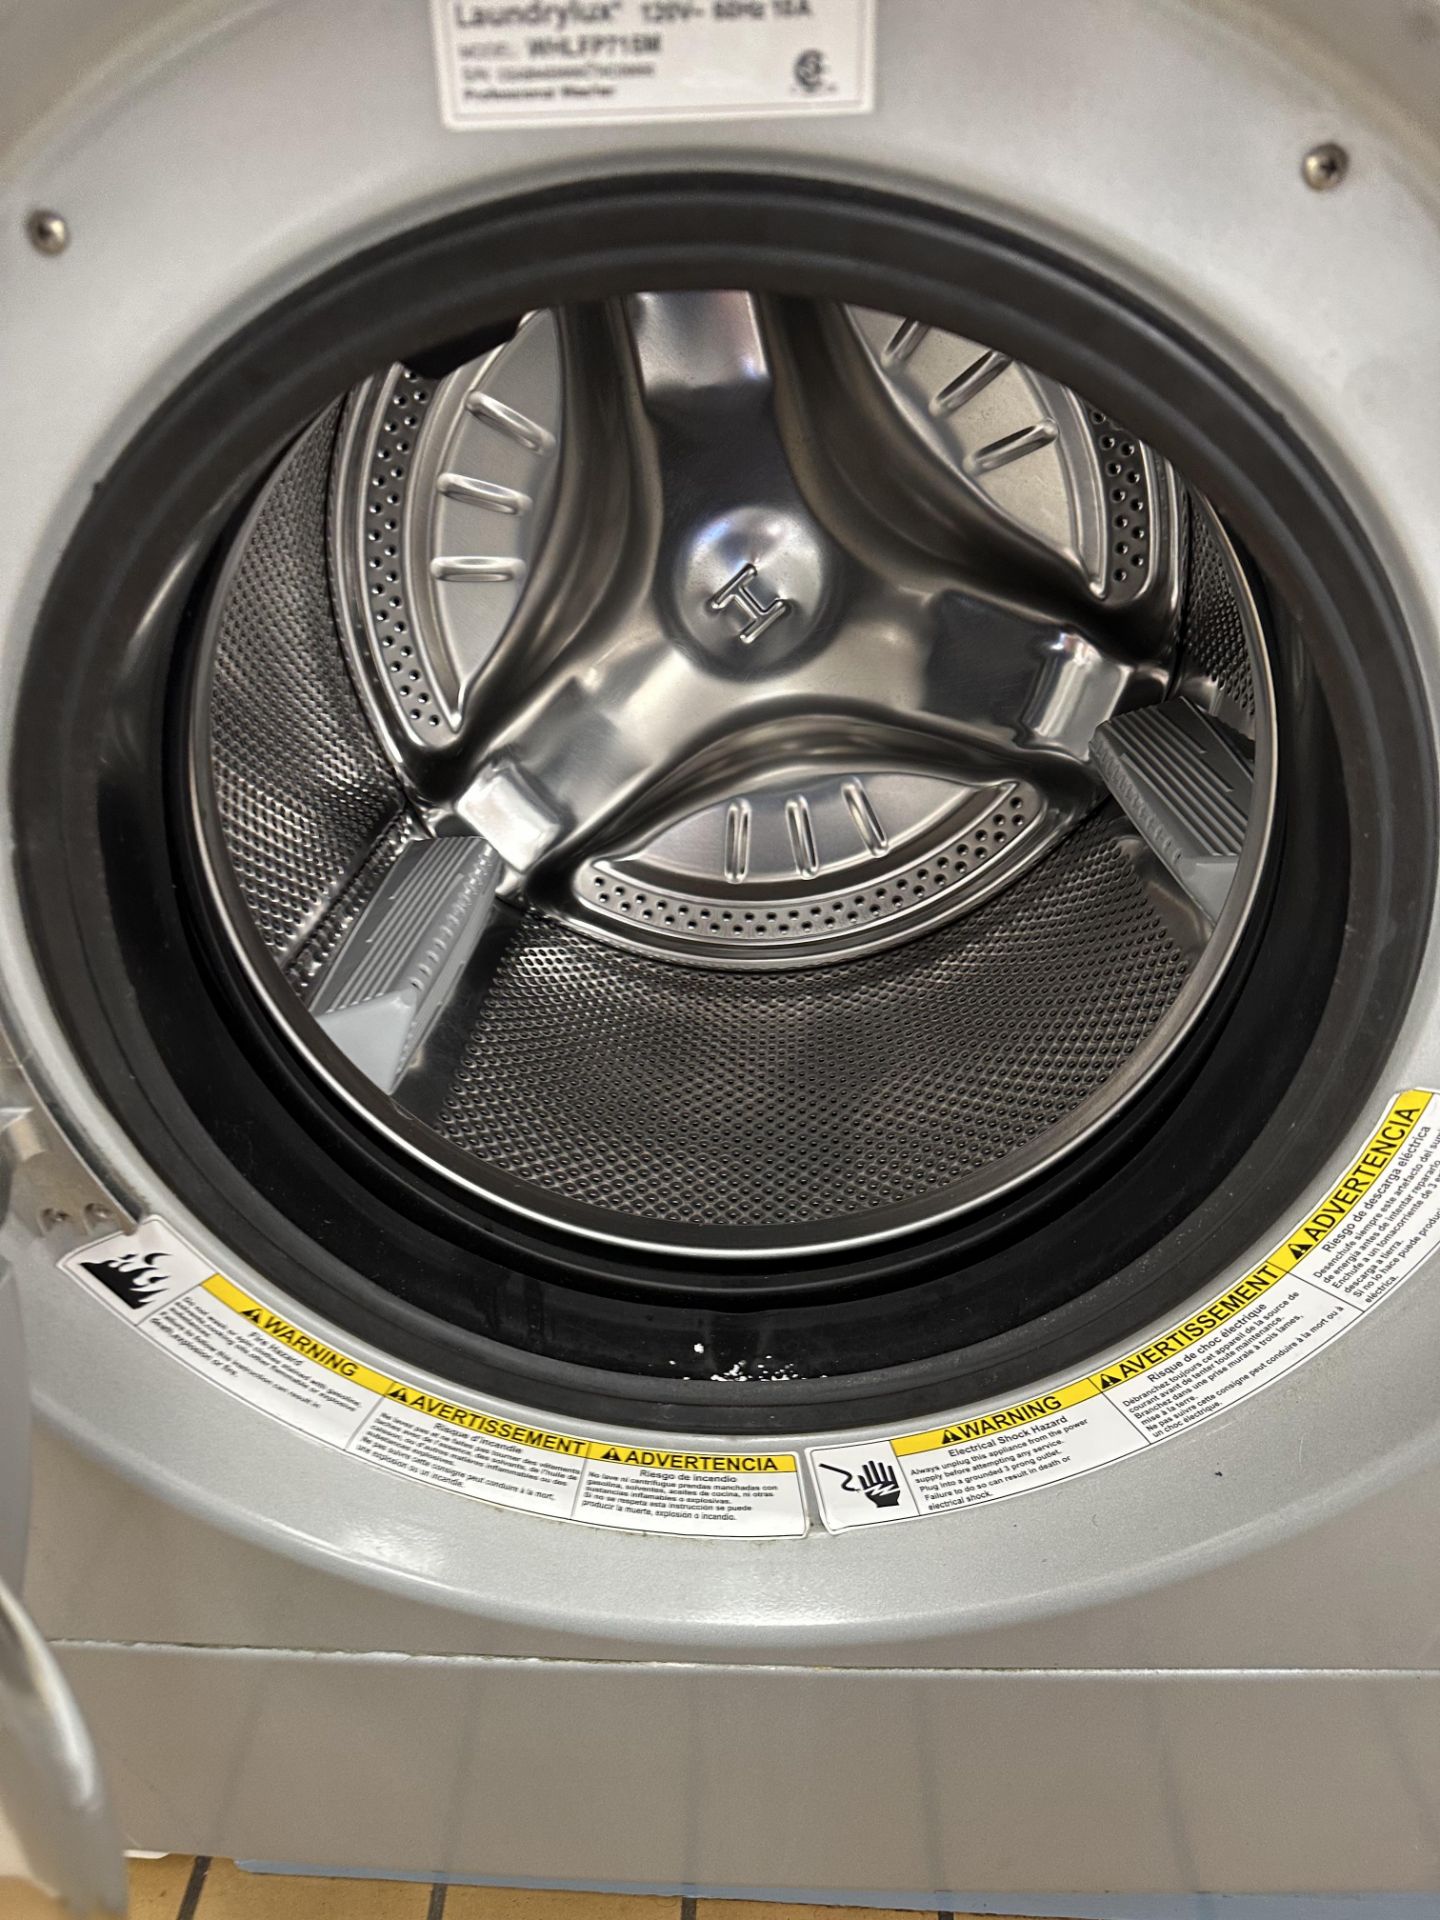 Wascomat Encore #WHLFP715M Commercial Heavy Duty Washing Machine - Coin Operated (Machine #4) - Image 2 of 2